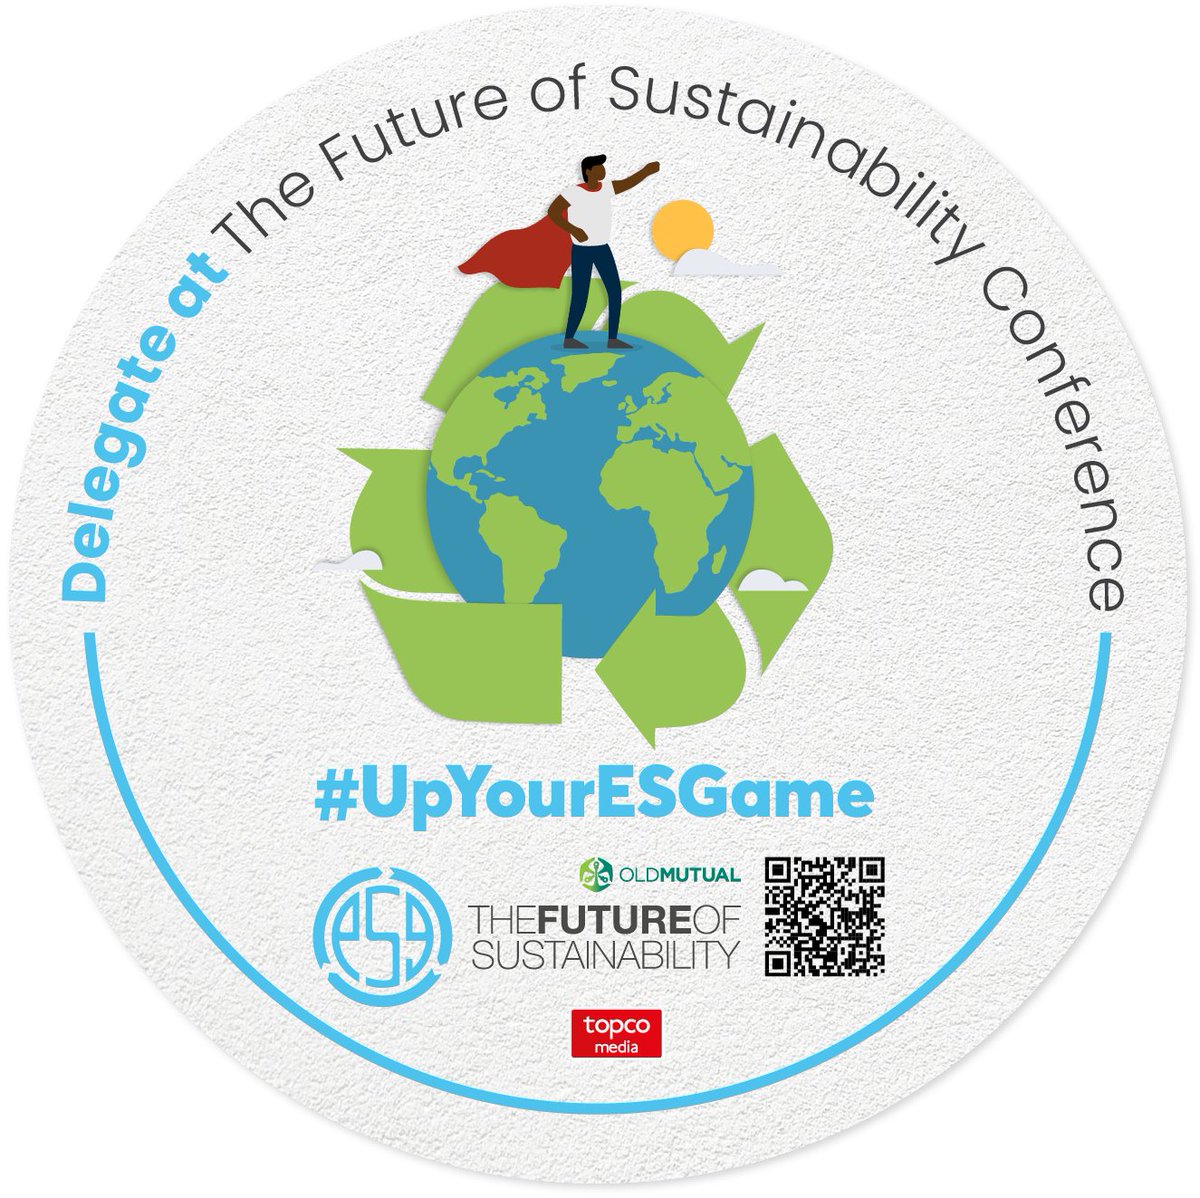 We are officially a delegate at the first annual Future of Sustainability Conference 2022! We are very excited to be a part of such an important community. @FutureofSustai1 

#FutureOfSustainability #FOS22 #UpYourESGame #BeAnESGenius